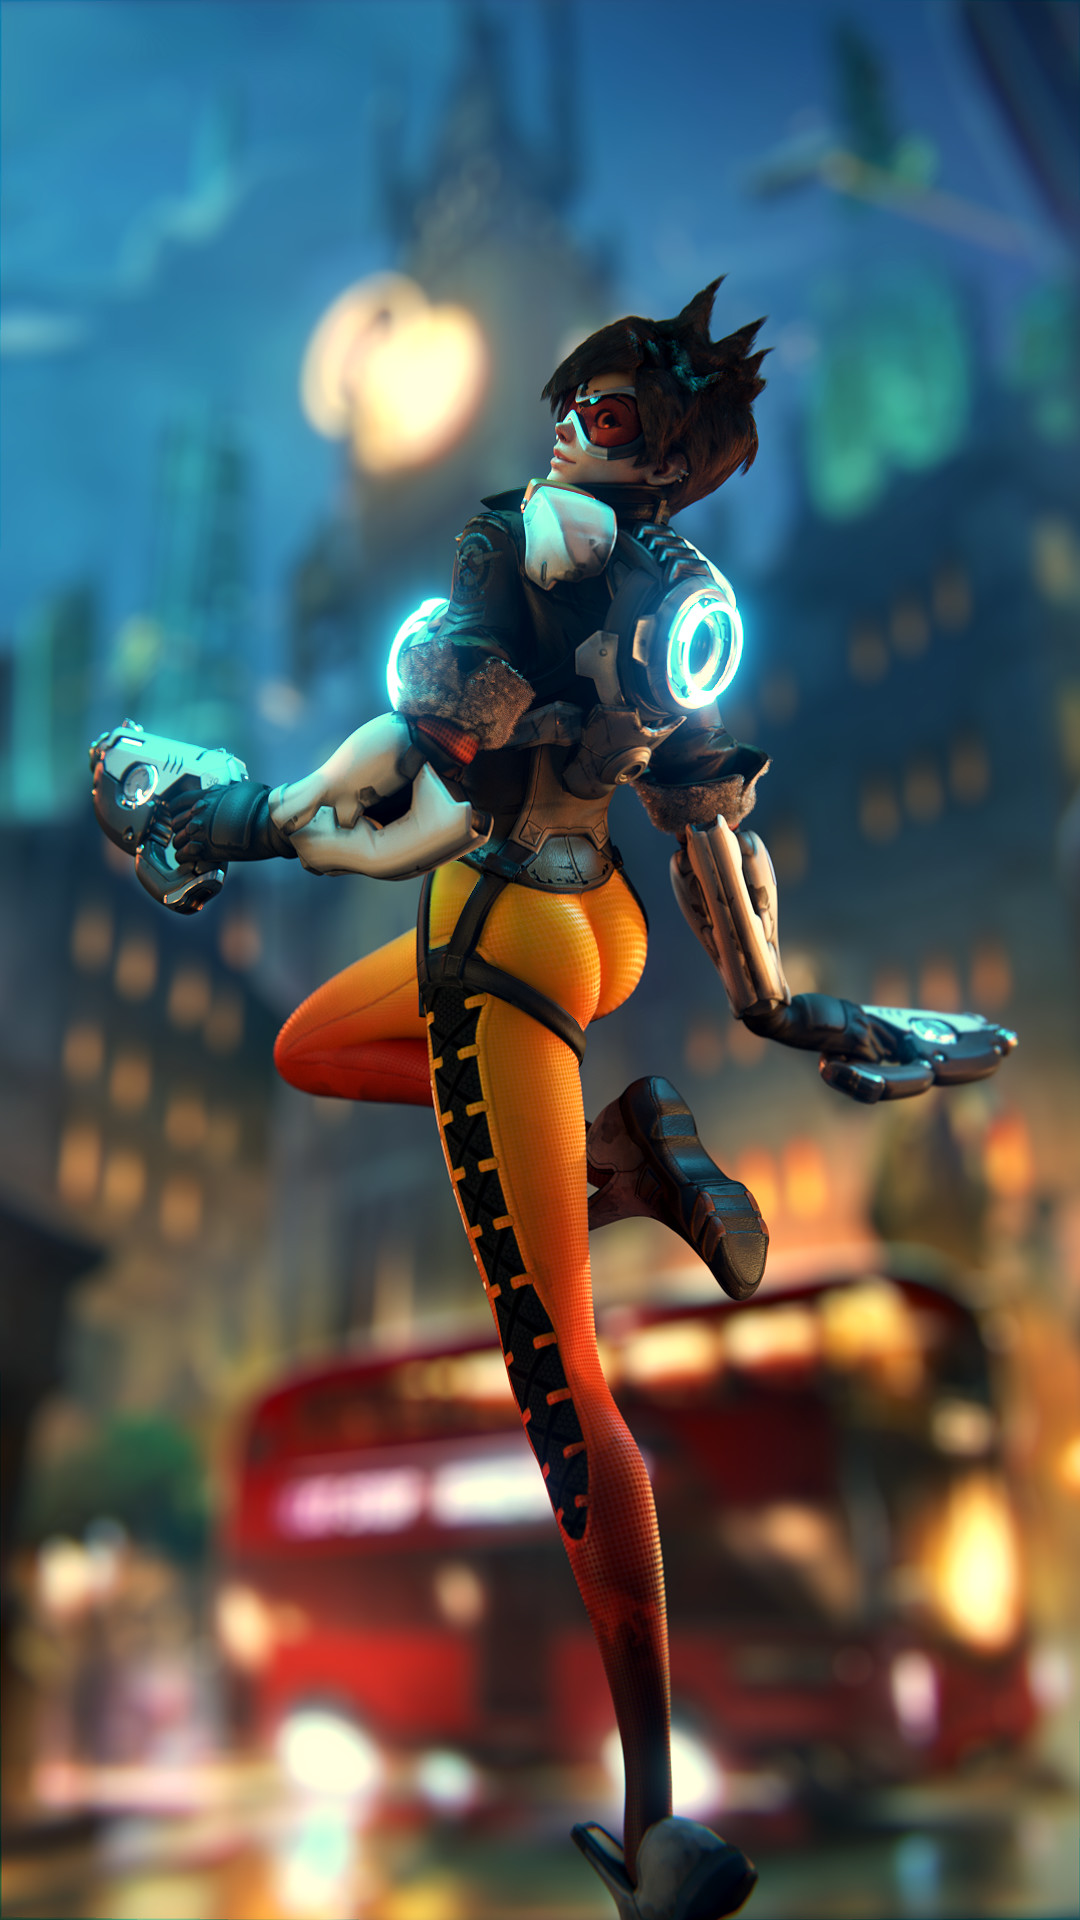 1080x1920 Tracer Artwork Overwatch Video Game Wallpaper Hd Image Picture